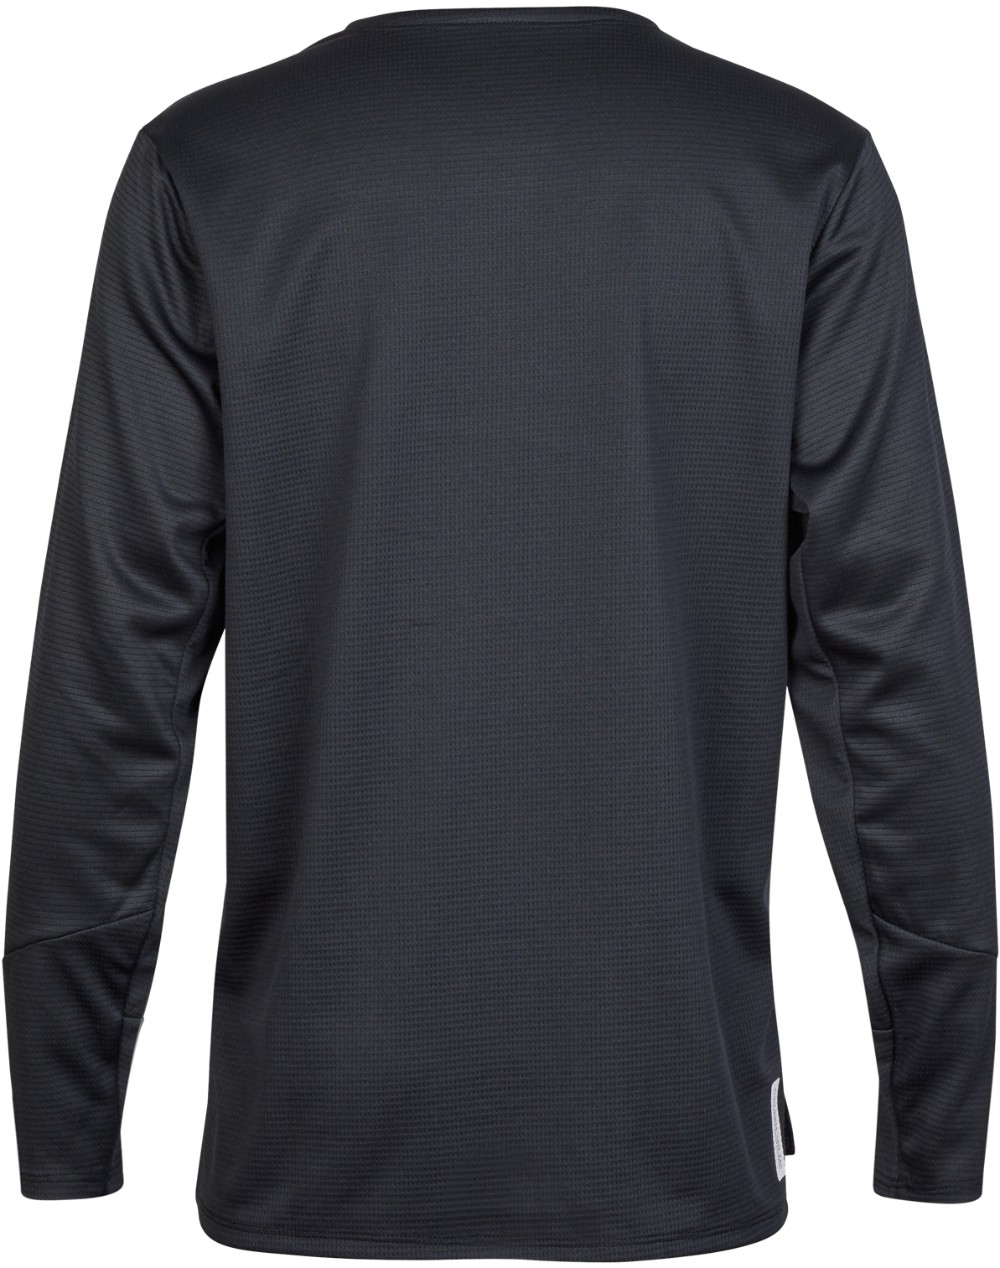 Defend Youth Long Sleeve MTB Jersey image 1